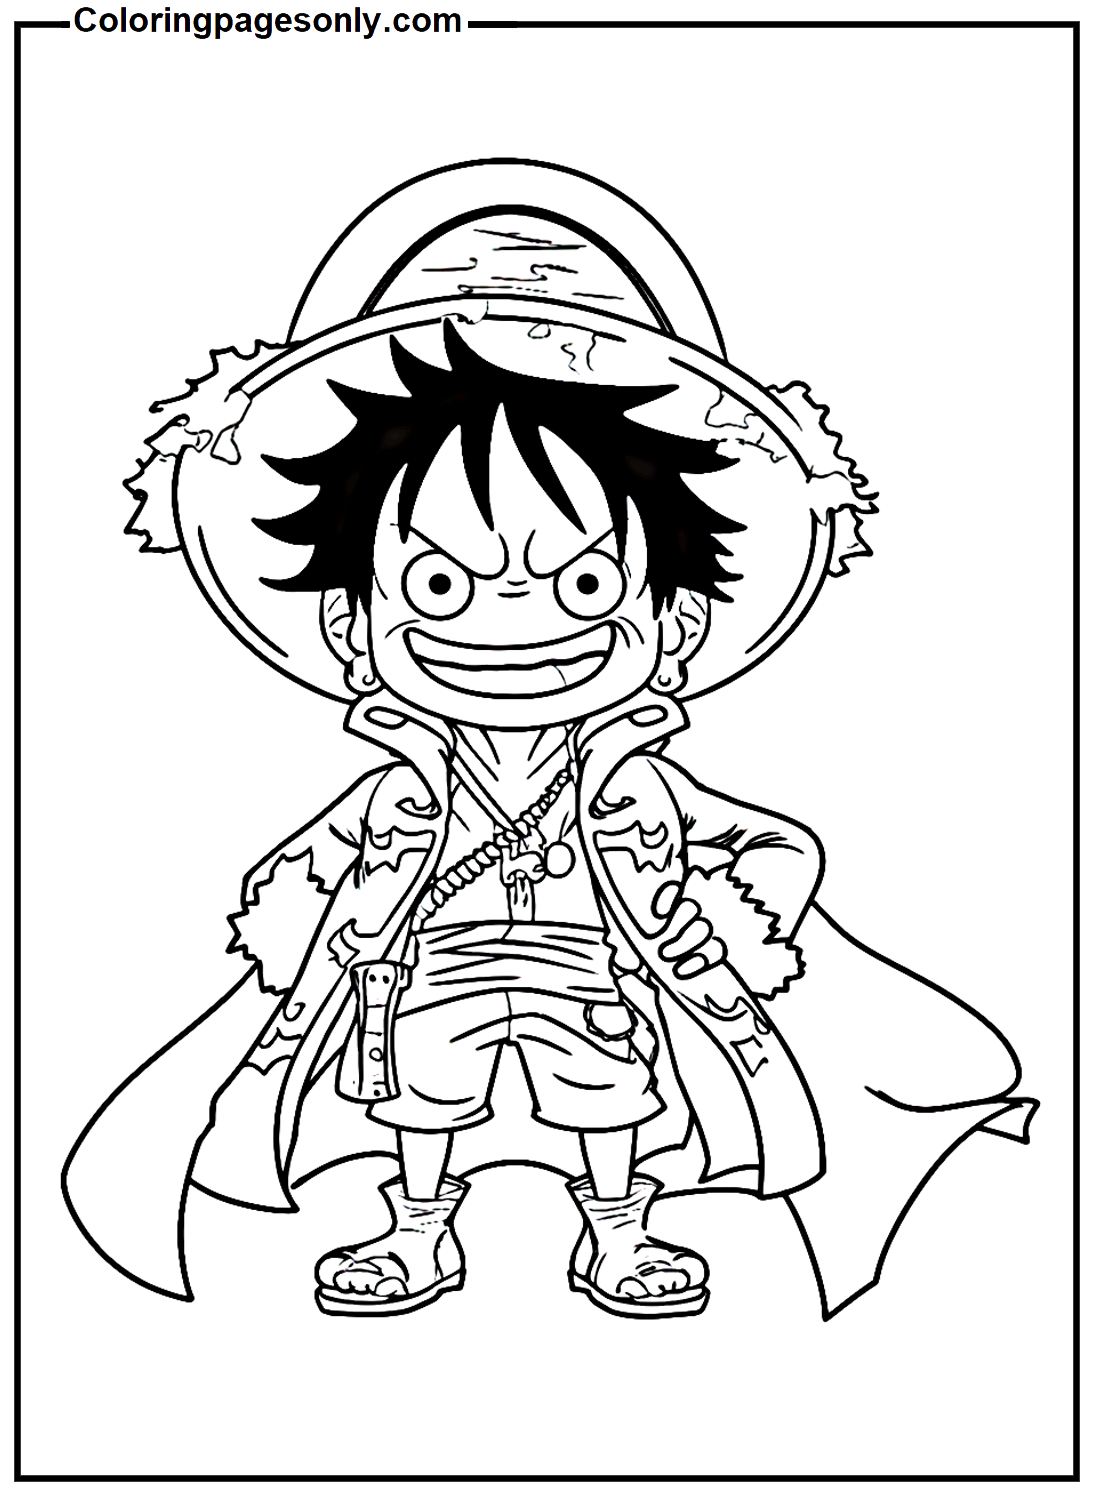 Little Luffy In A Pirate Cloak from Anime